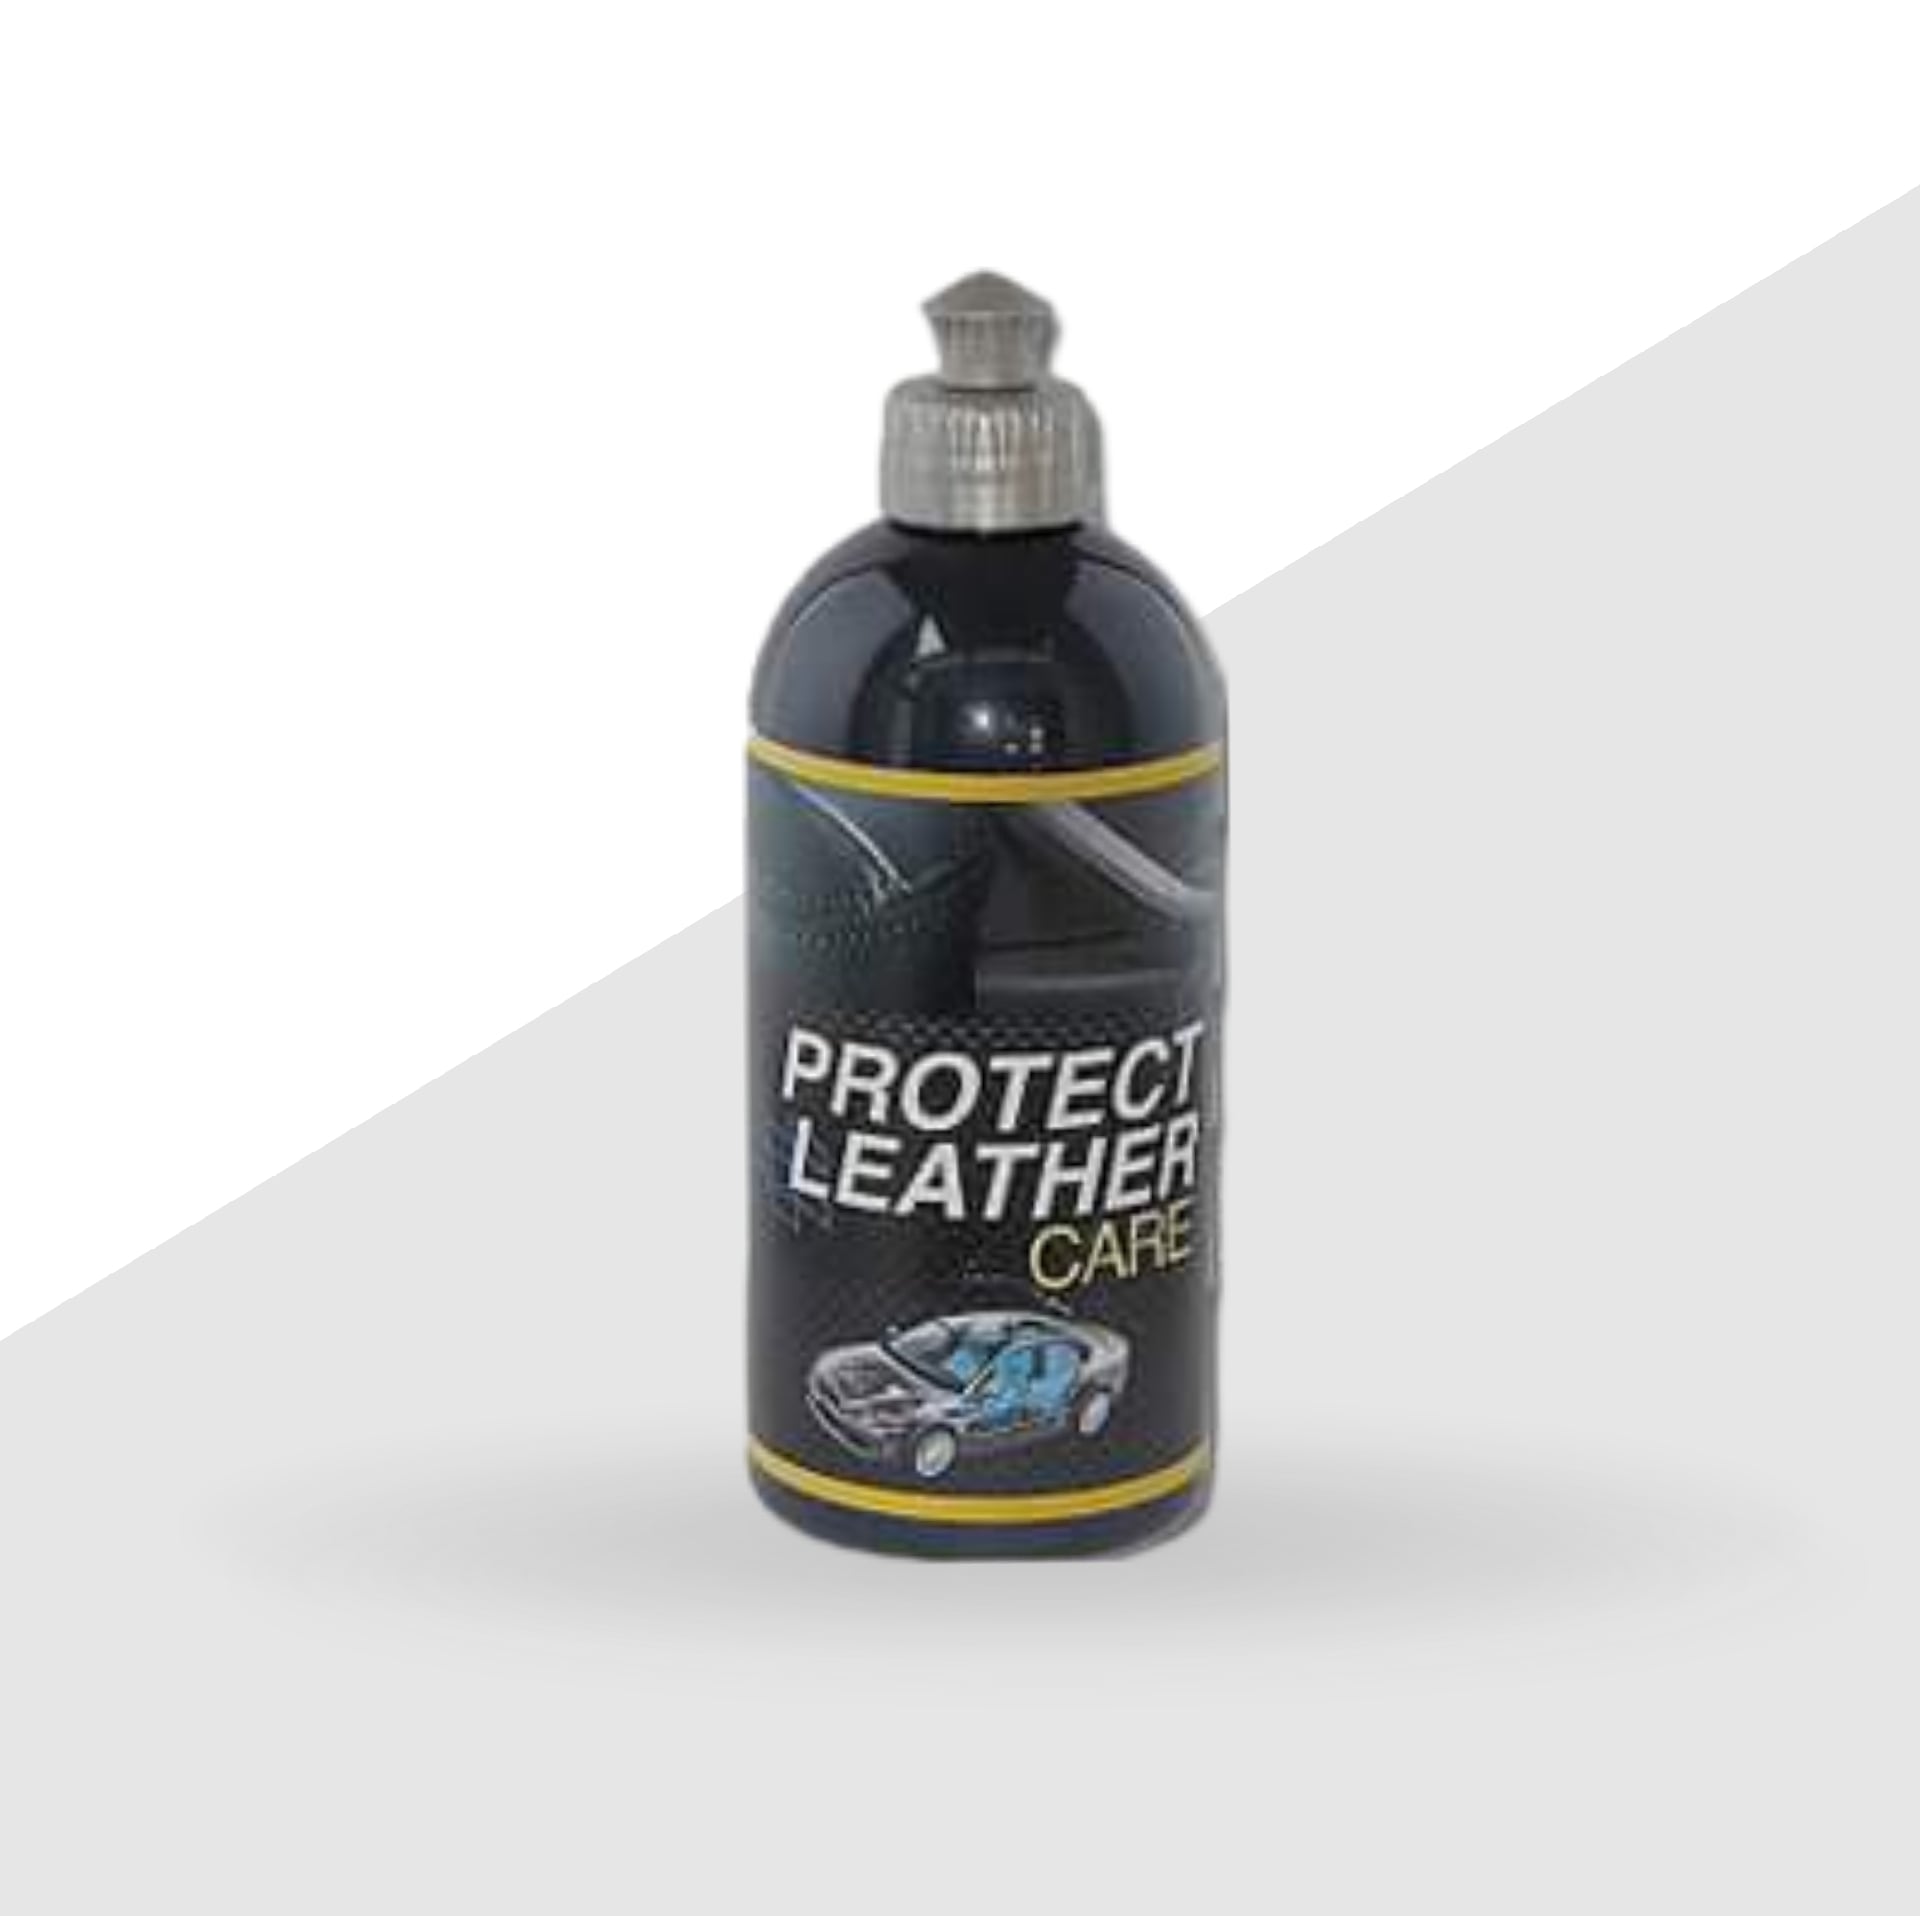 PROTECT LEATHER CARE nettoyant cuir 500ml – ALS COSMETIC